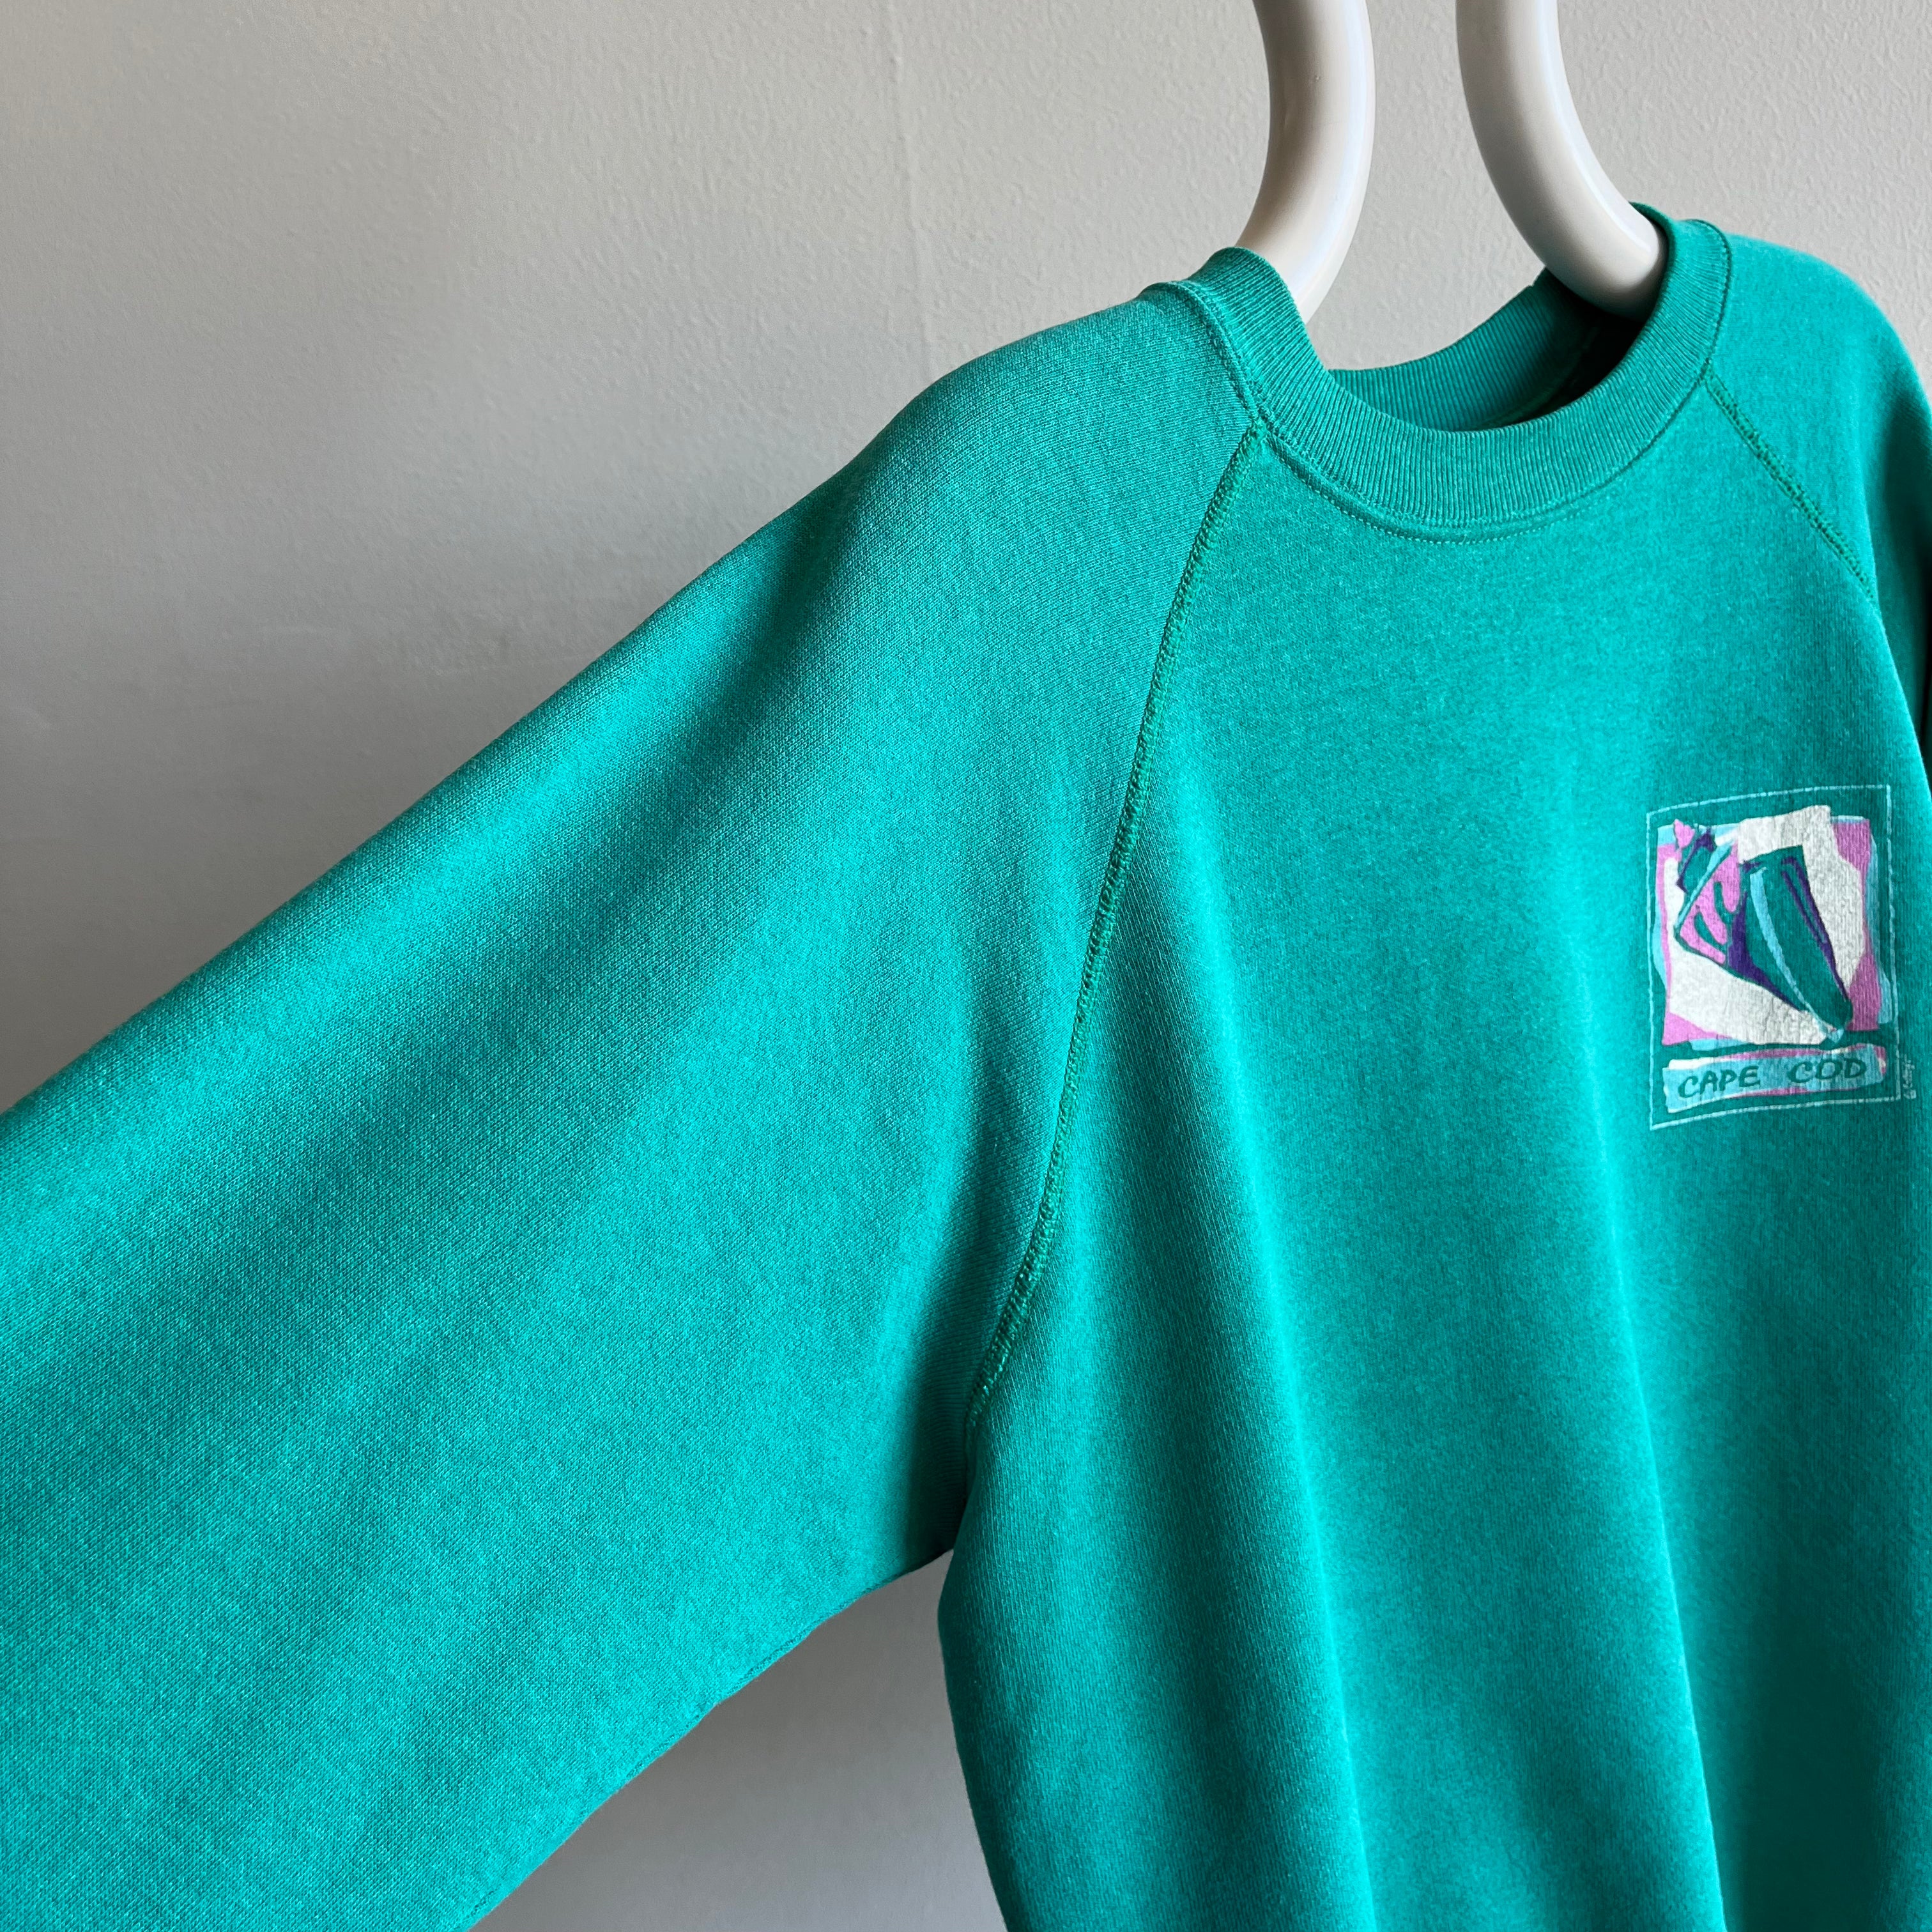 1980s Cape Cod Sweatshirt with Staining